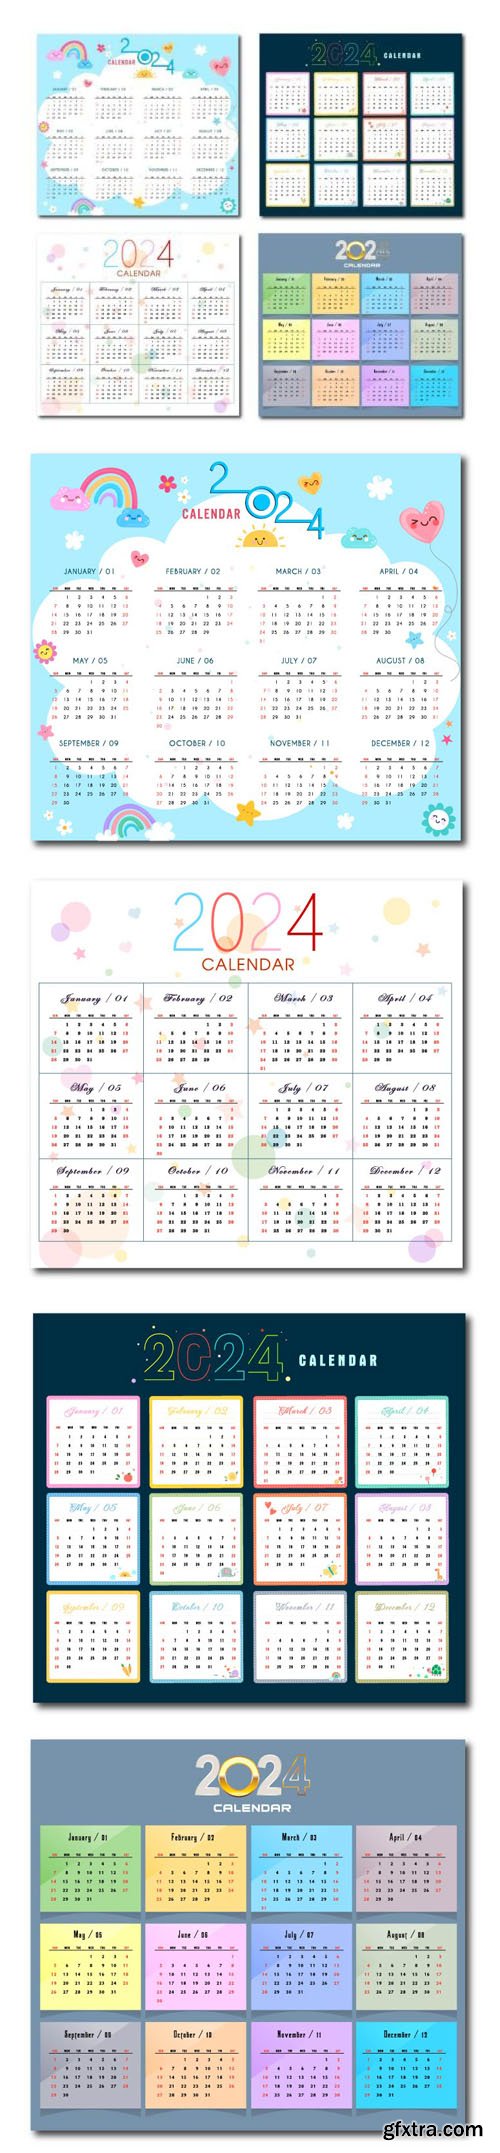 4 Calendars for New Year 2024 - Vector Templates Pack